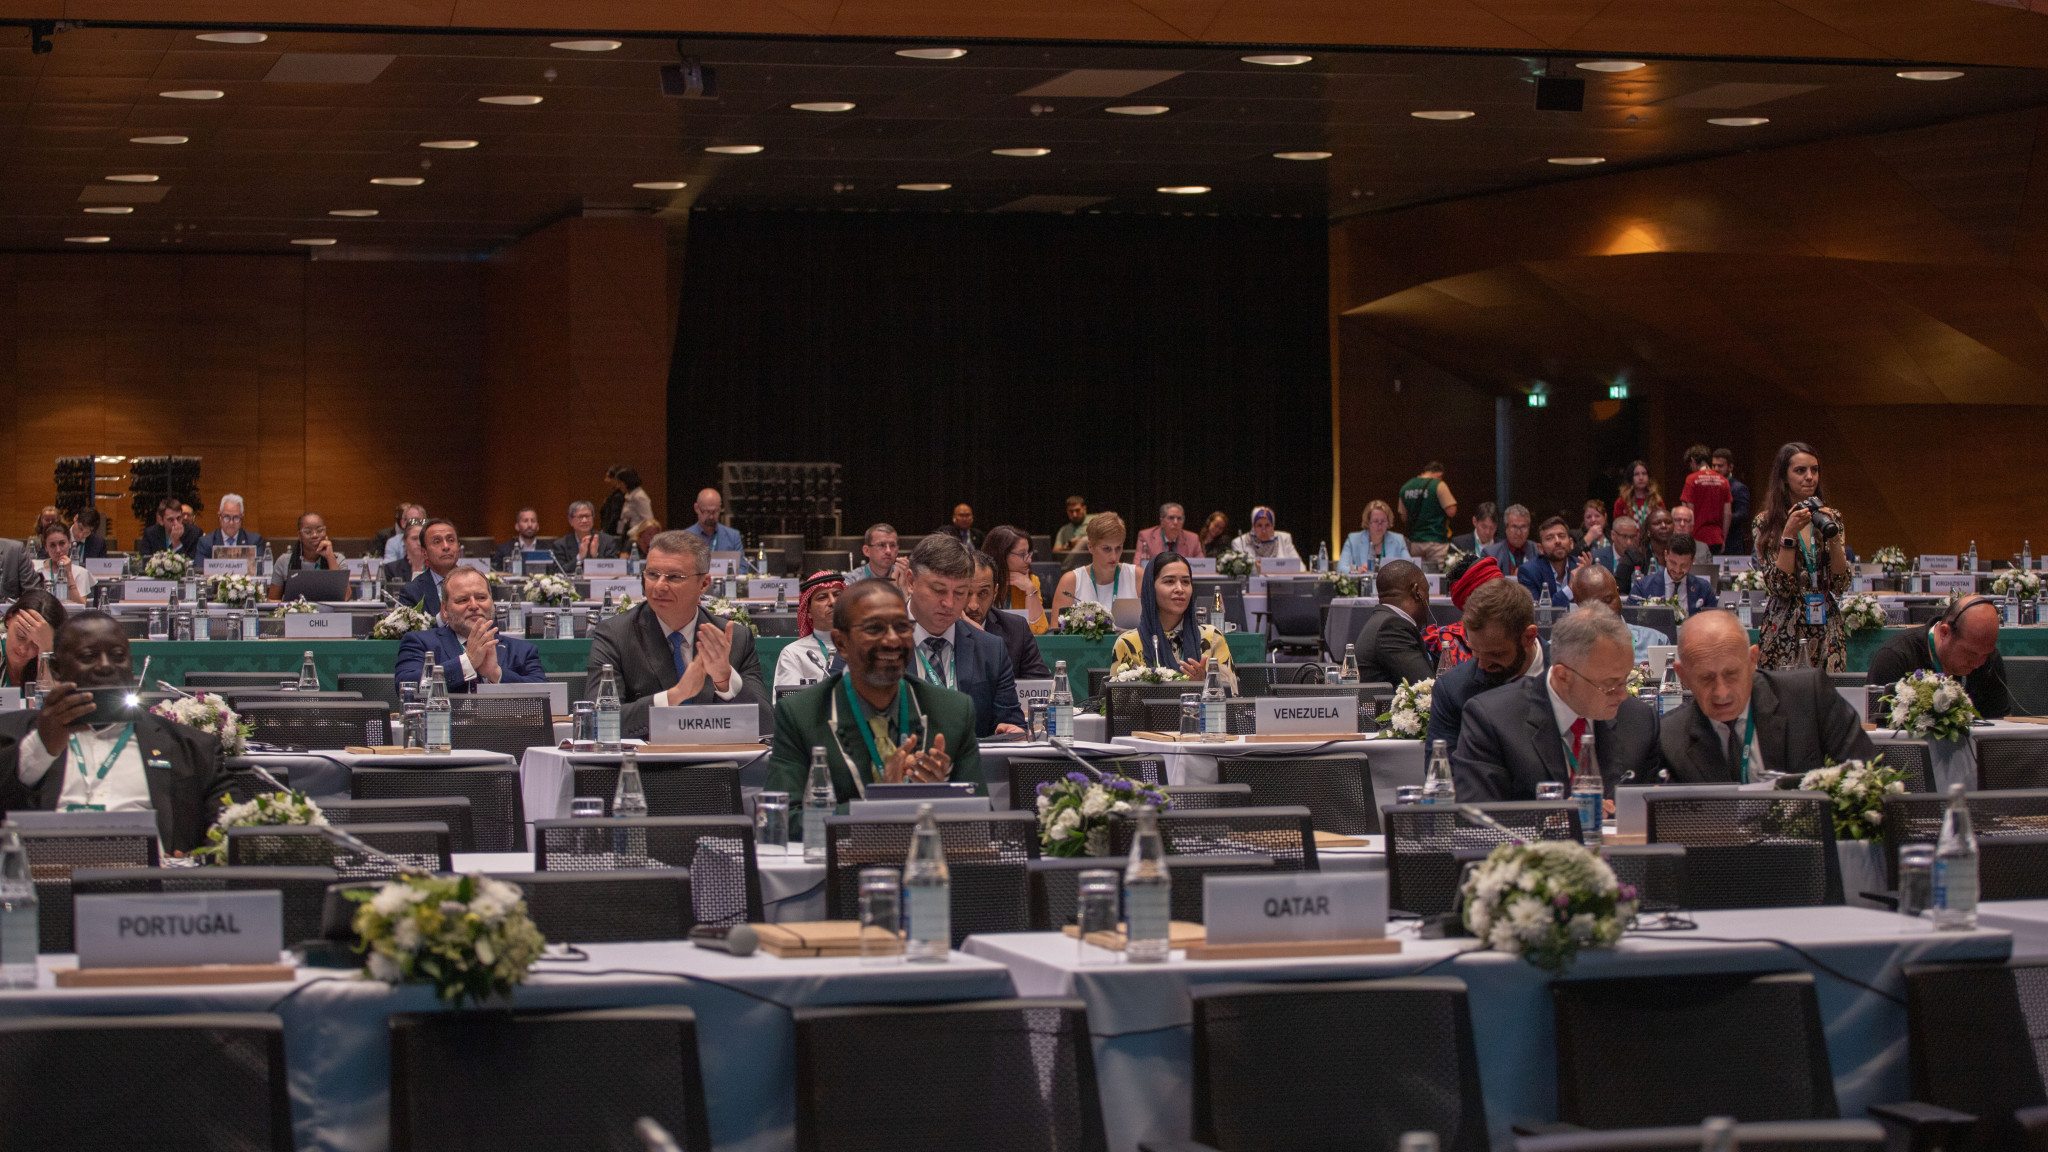 Sports Ministers from all over the world gathered in Baku for last year's MINEPS VII to discuss issues facing sport and to adopt UNESCO's Fit for Life Alliance ©MINEPS VII